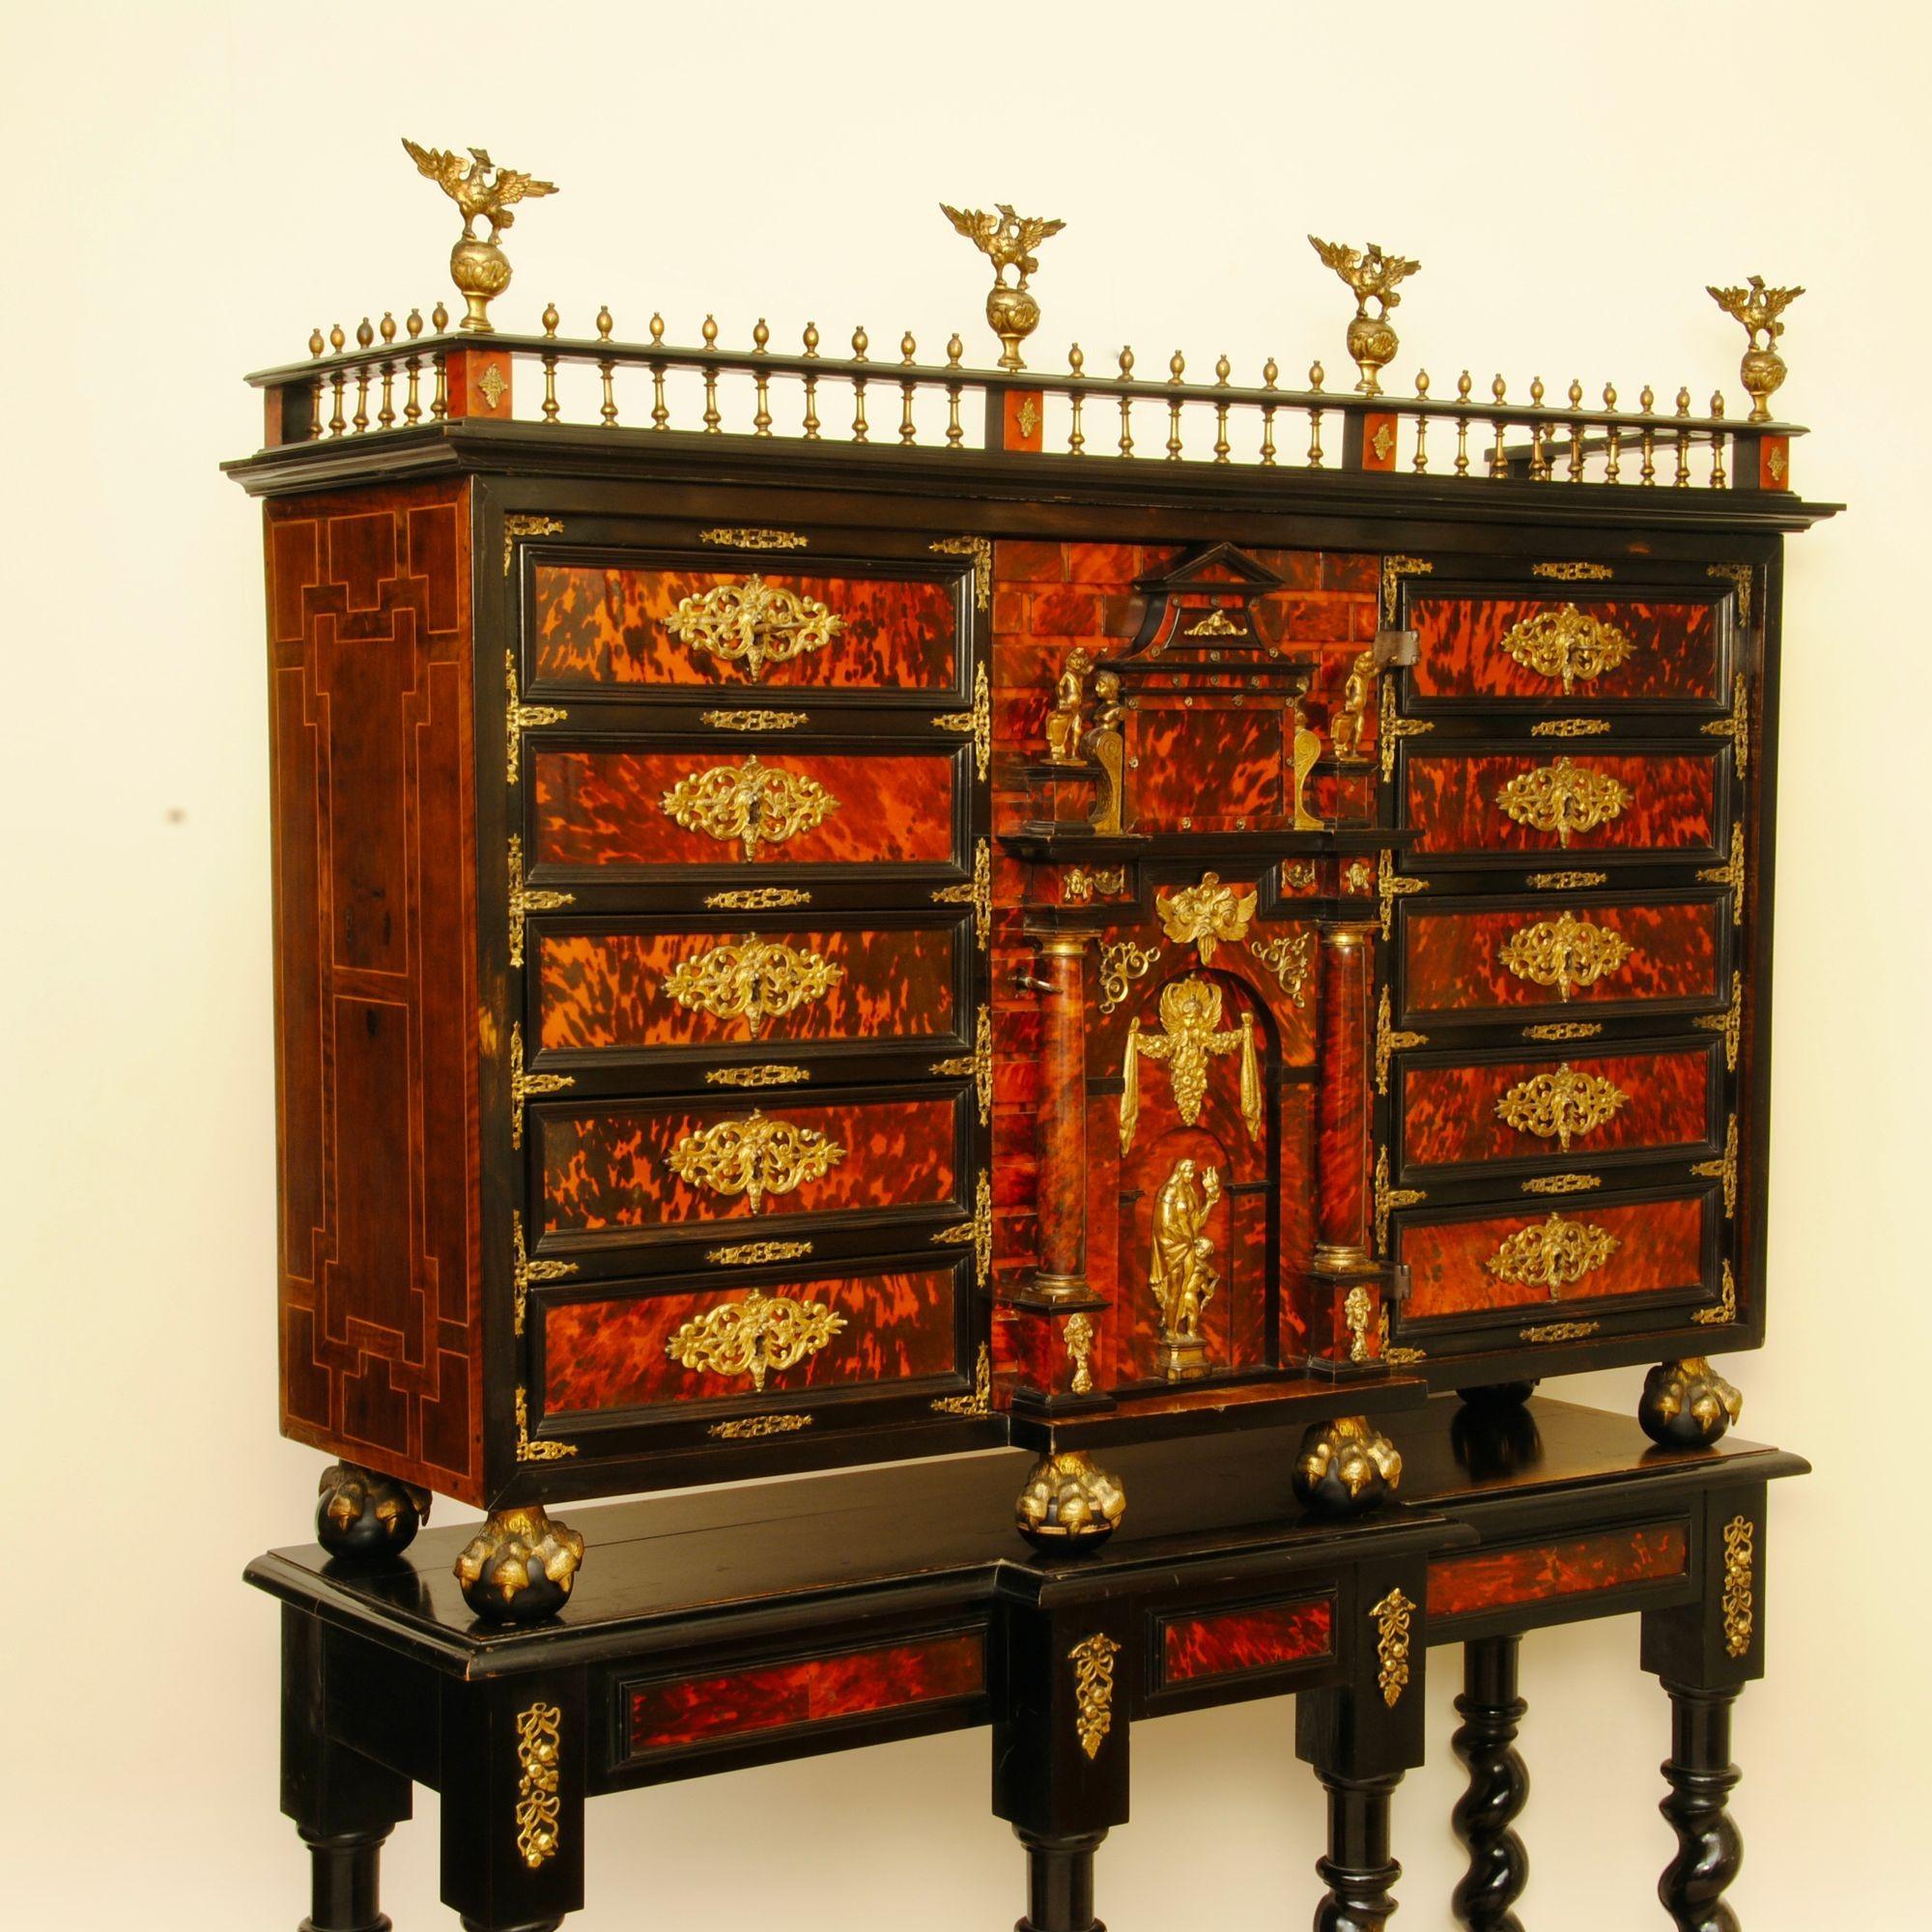 Stunning Late 17th Century Spanish Tortoiseshell Cabinet In Good Condition For Sale In Lincolnshire, GB